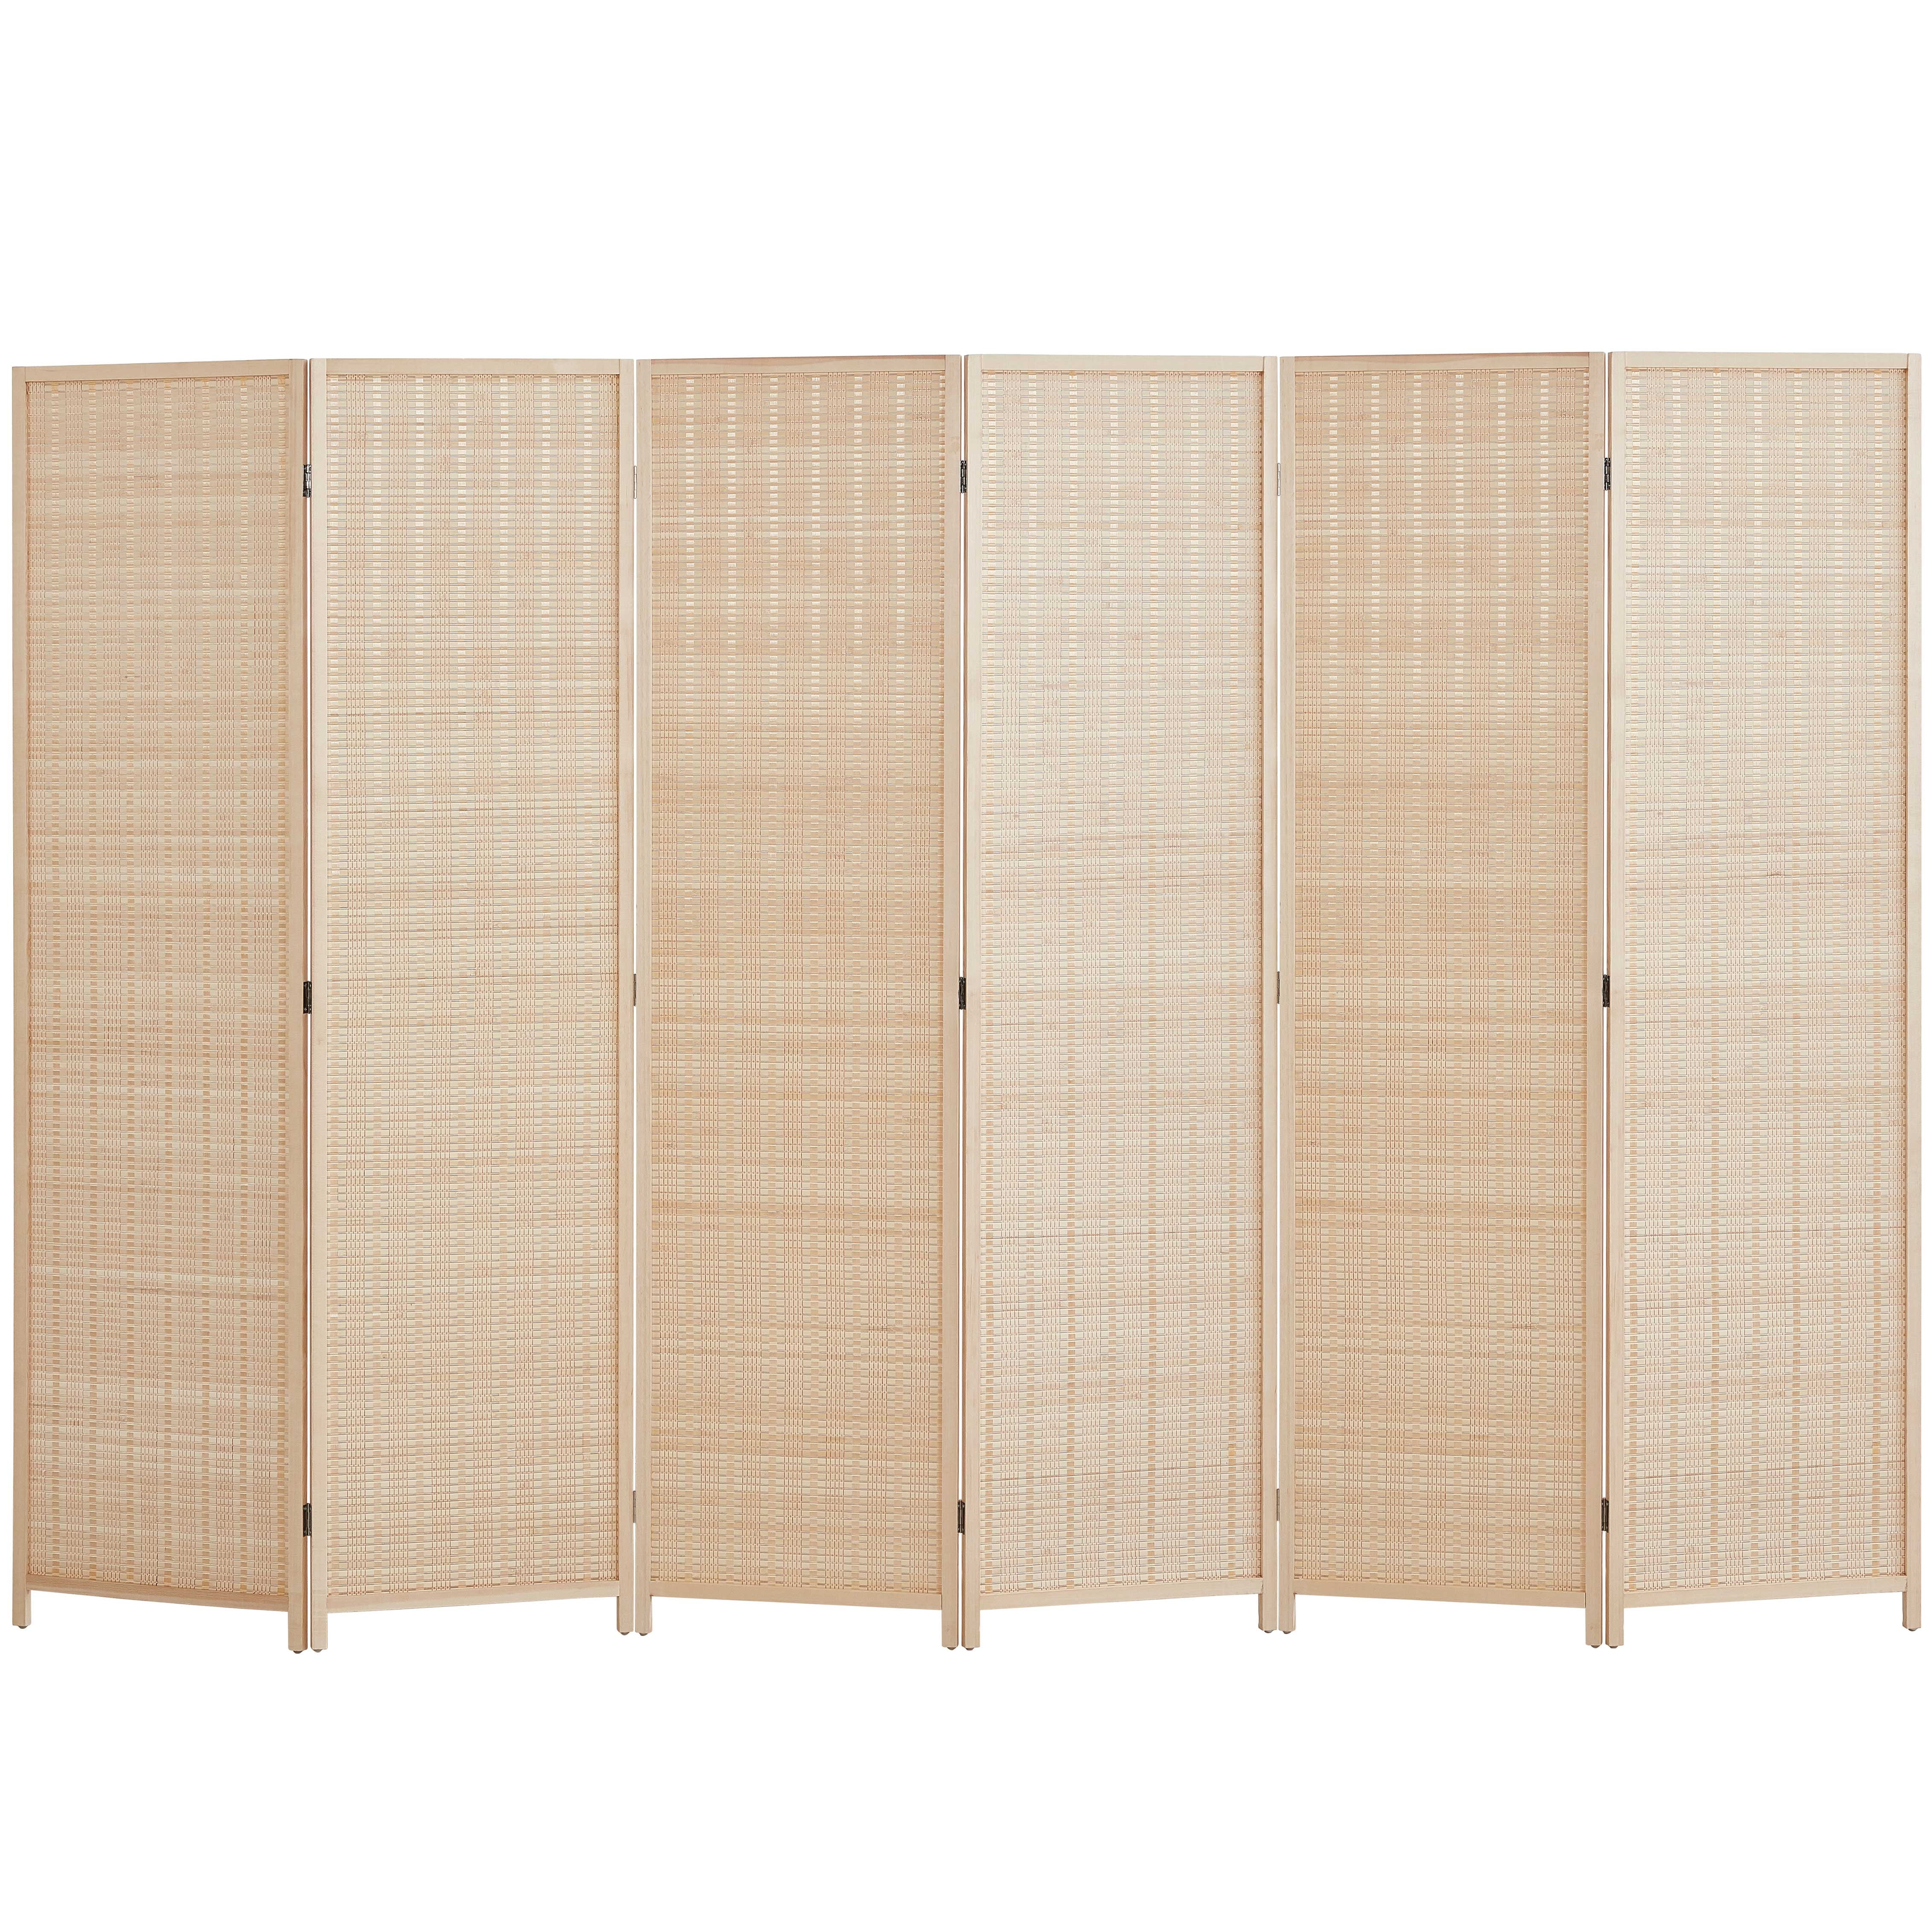 Mini Flower Bamboo Screen Room Divider Wood Folding Partition Business Gift New 